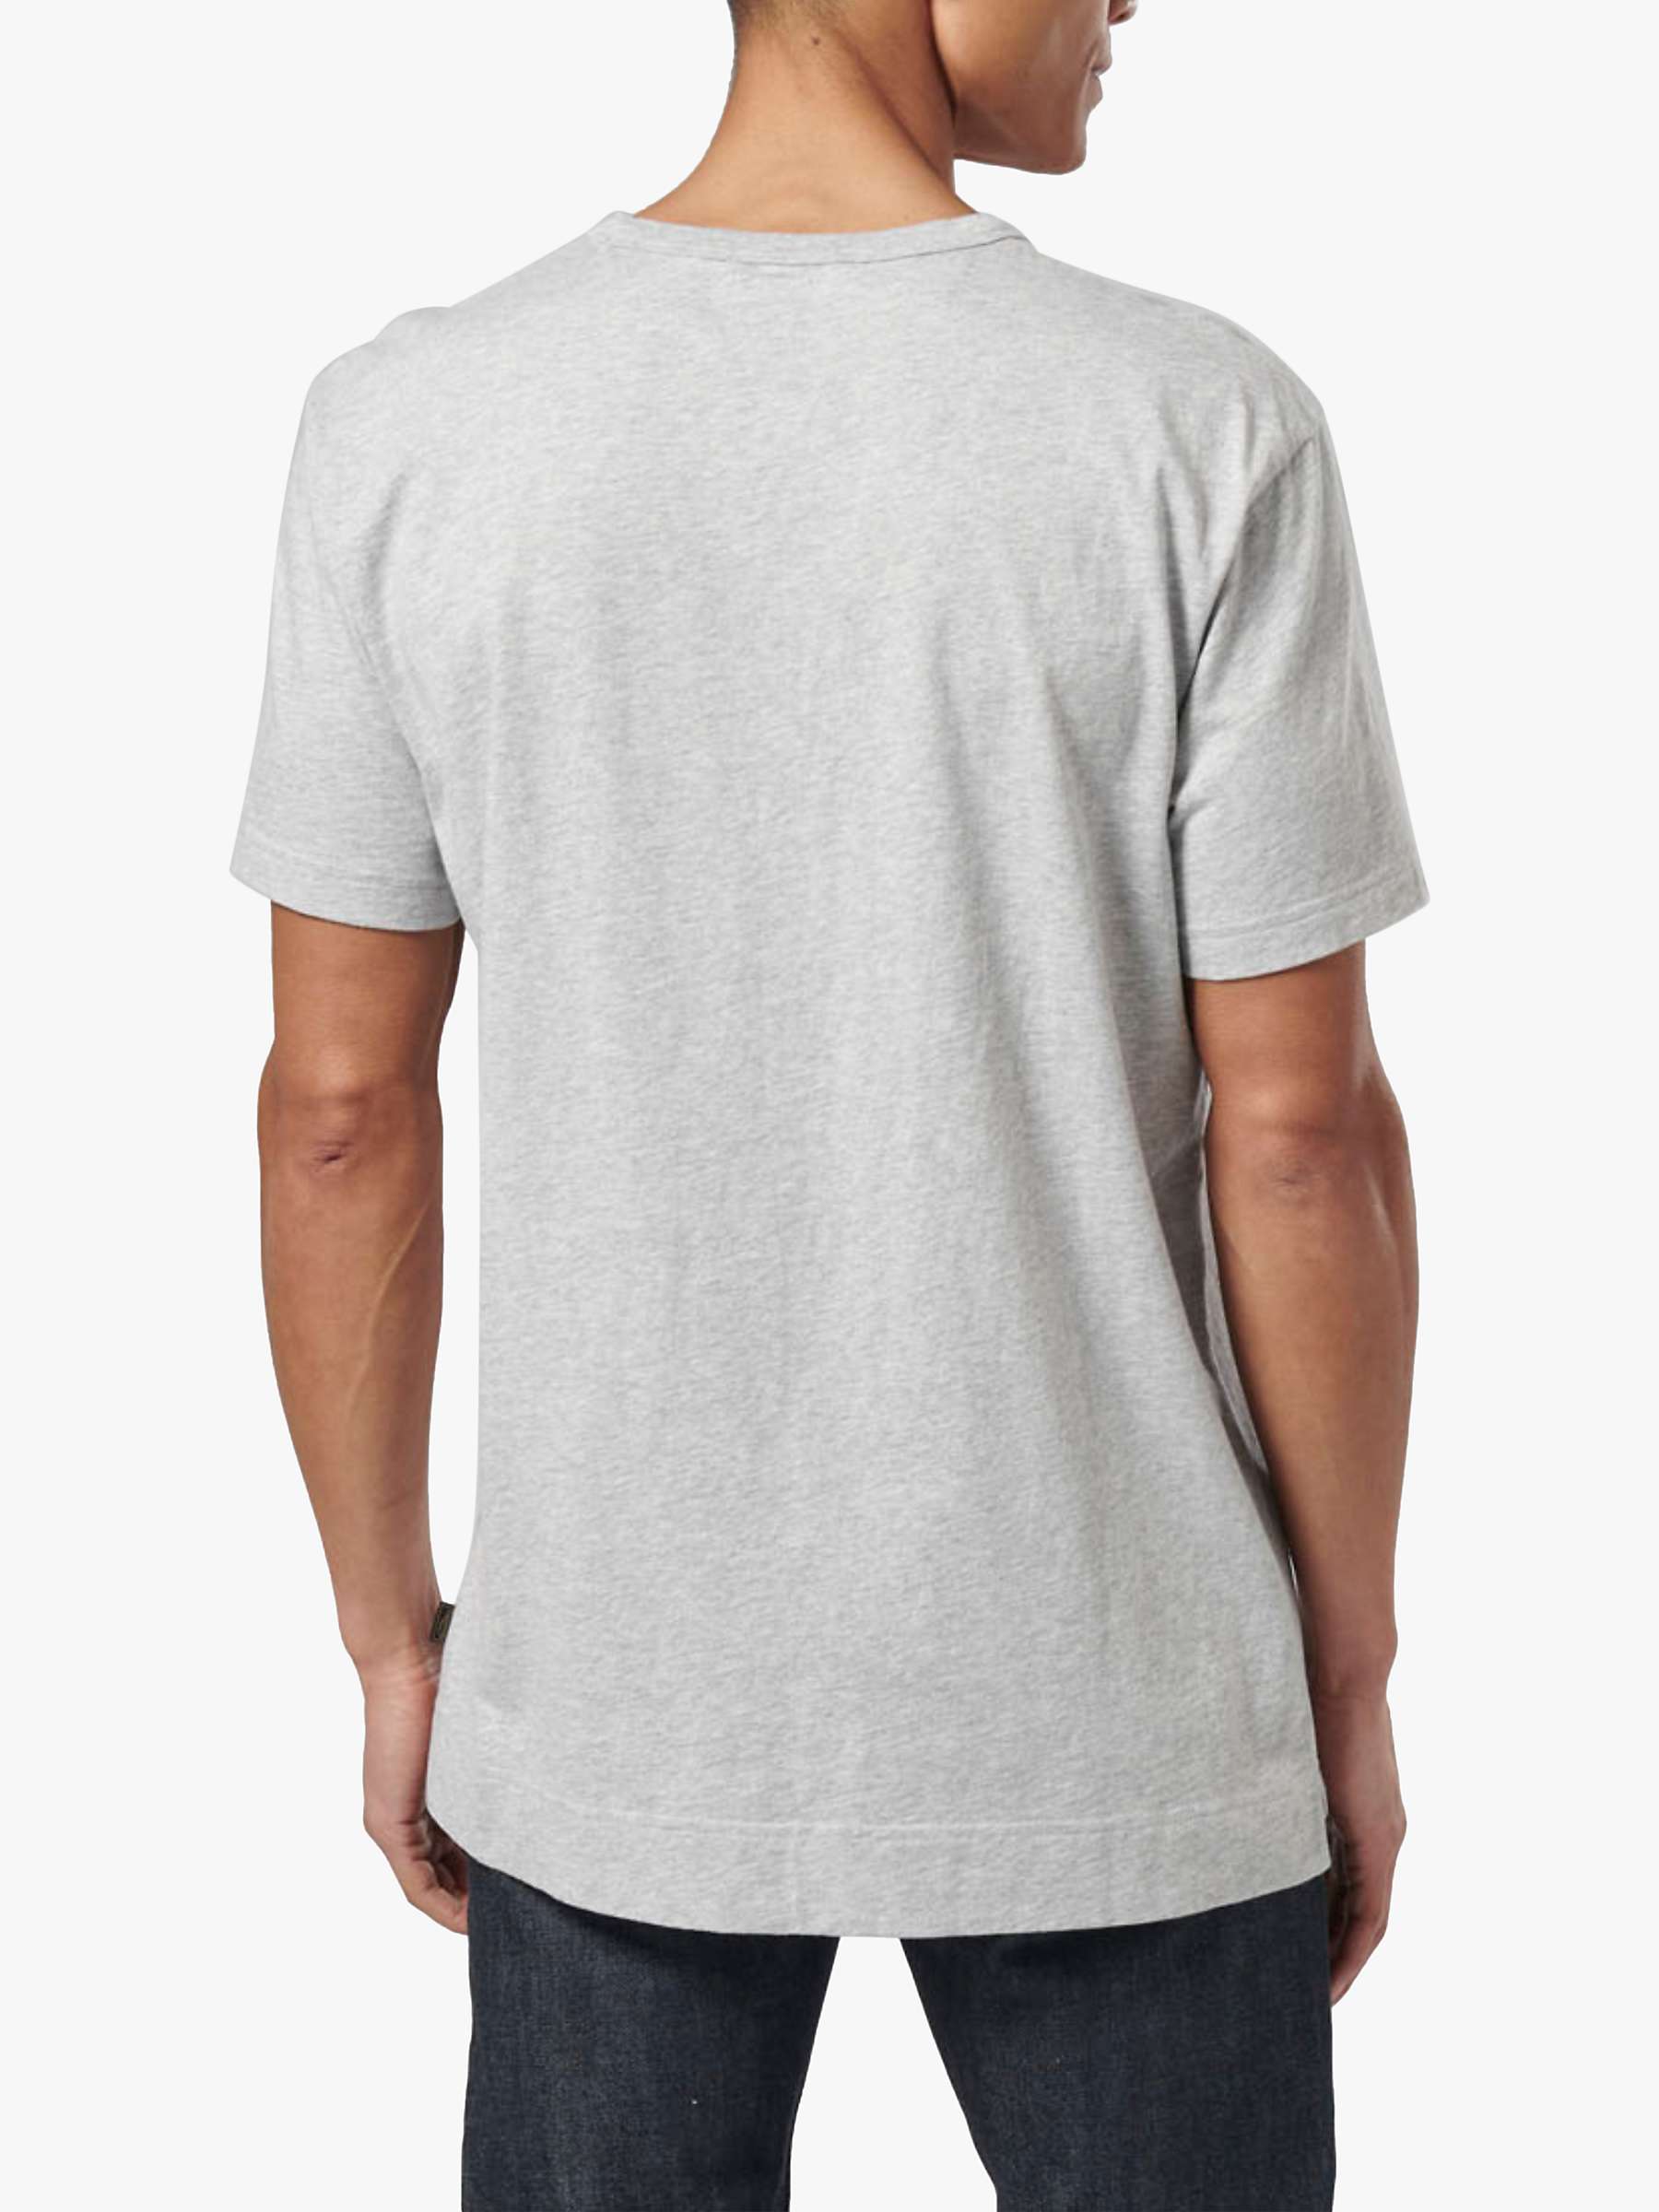 Buy Triumph Motorcycles Front Print T-Shirt, Silver Marl Online at johnlewis.com